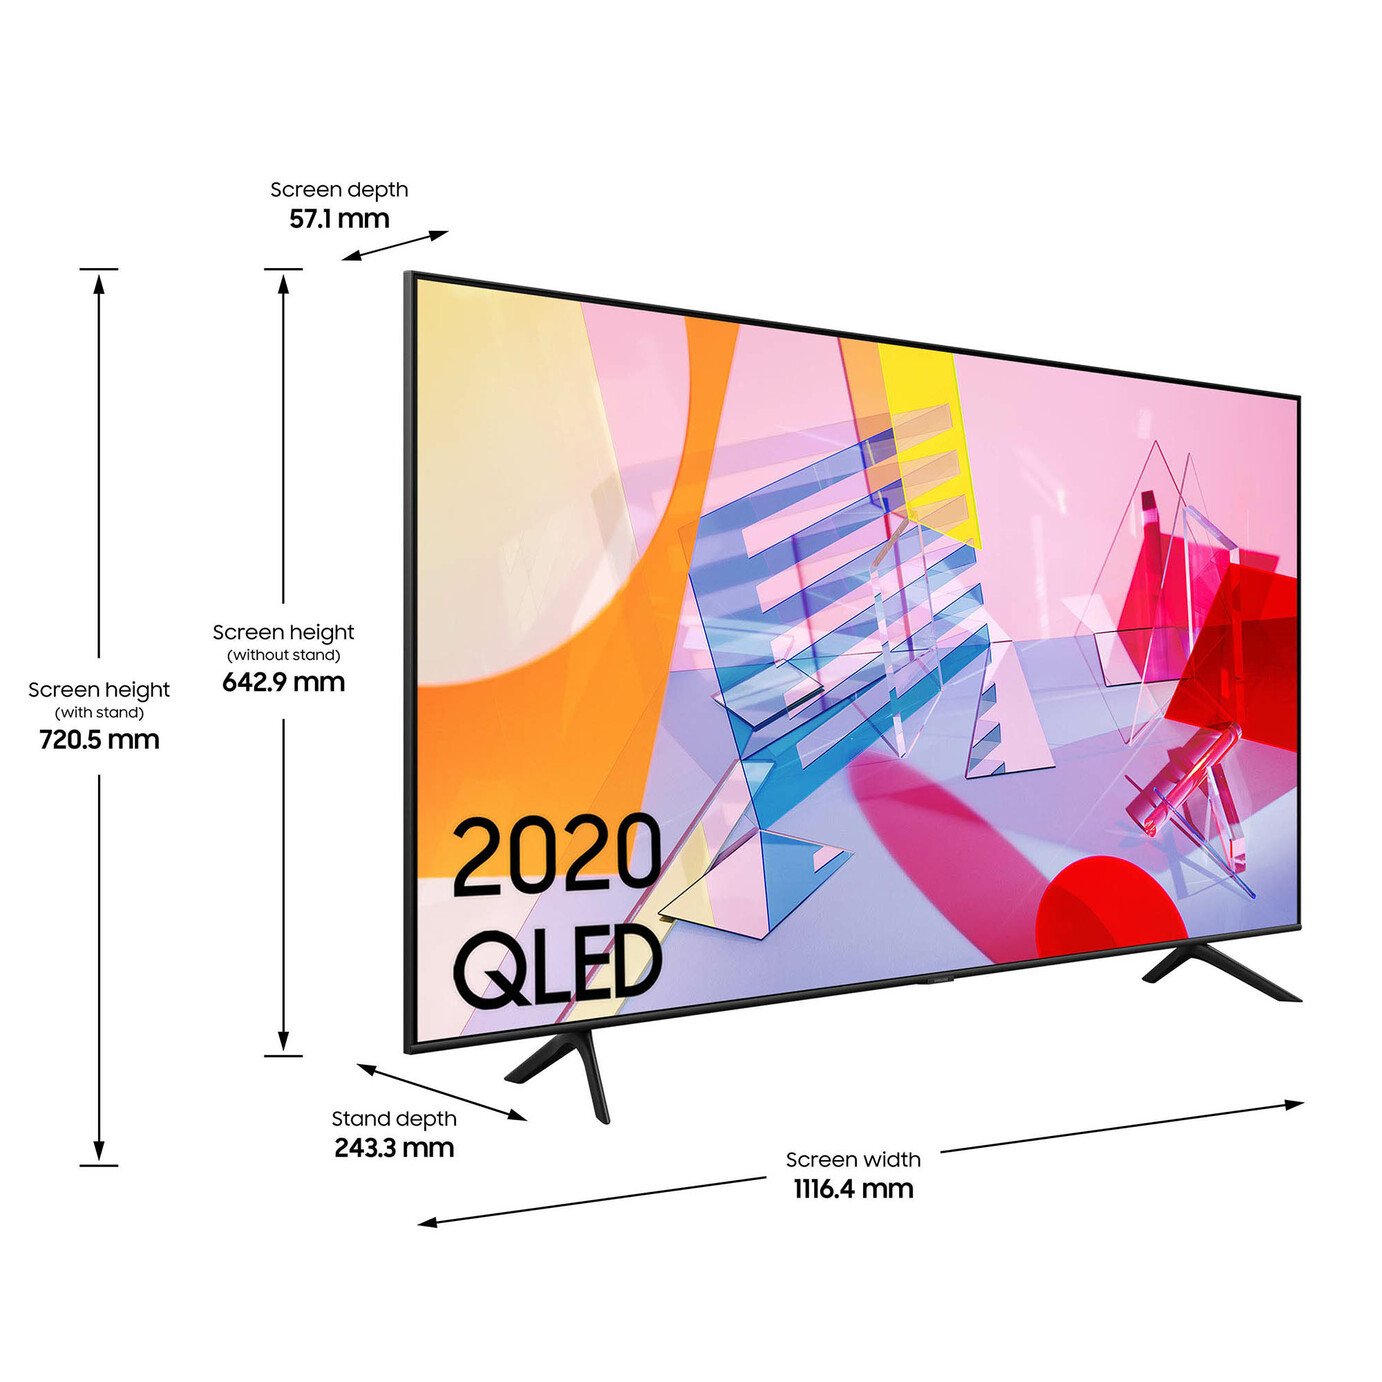 Samsung 50 Inch QE50Q60T Smart Ultra HD QLED TV with HDR Review